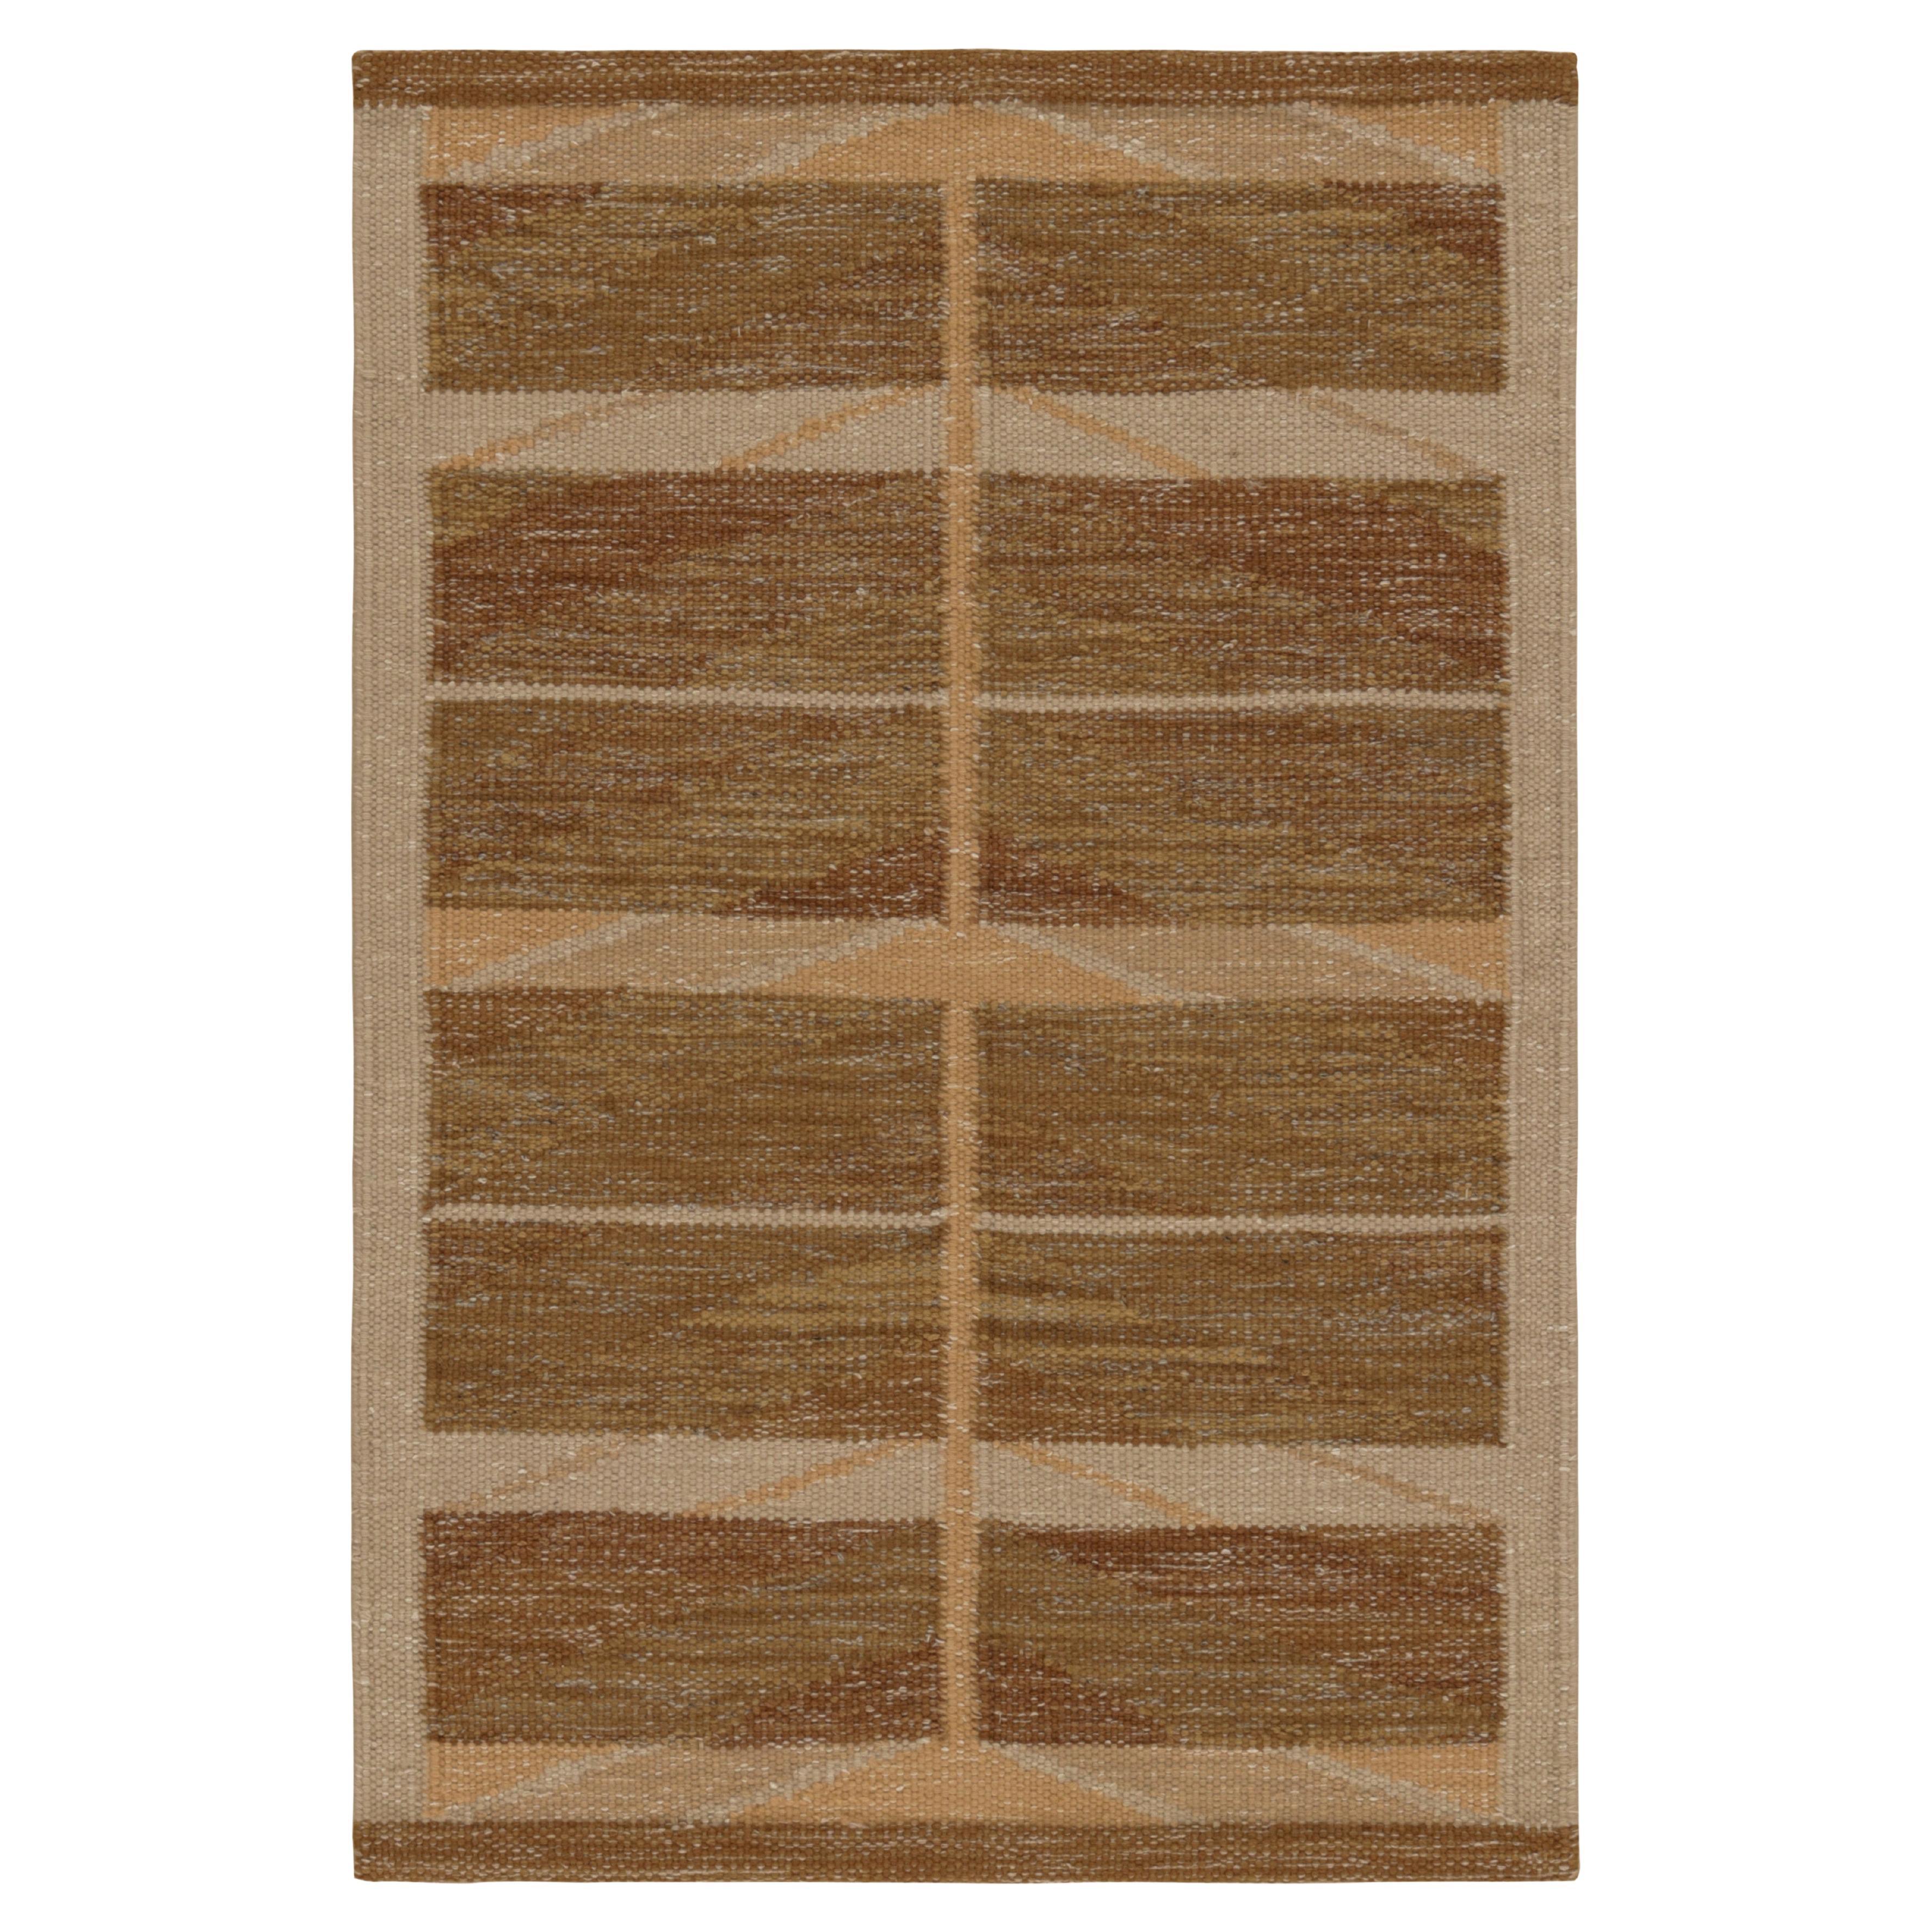 Rug & Kilim’s Scandinavian Style Rug in Beige-Brown, with Geometric Patterns For Sale